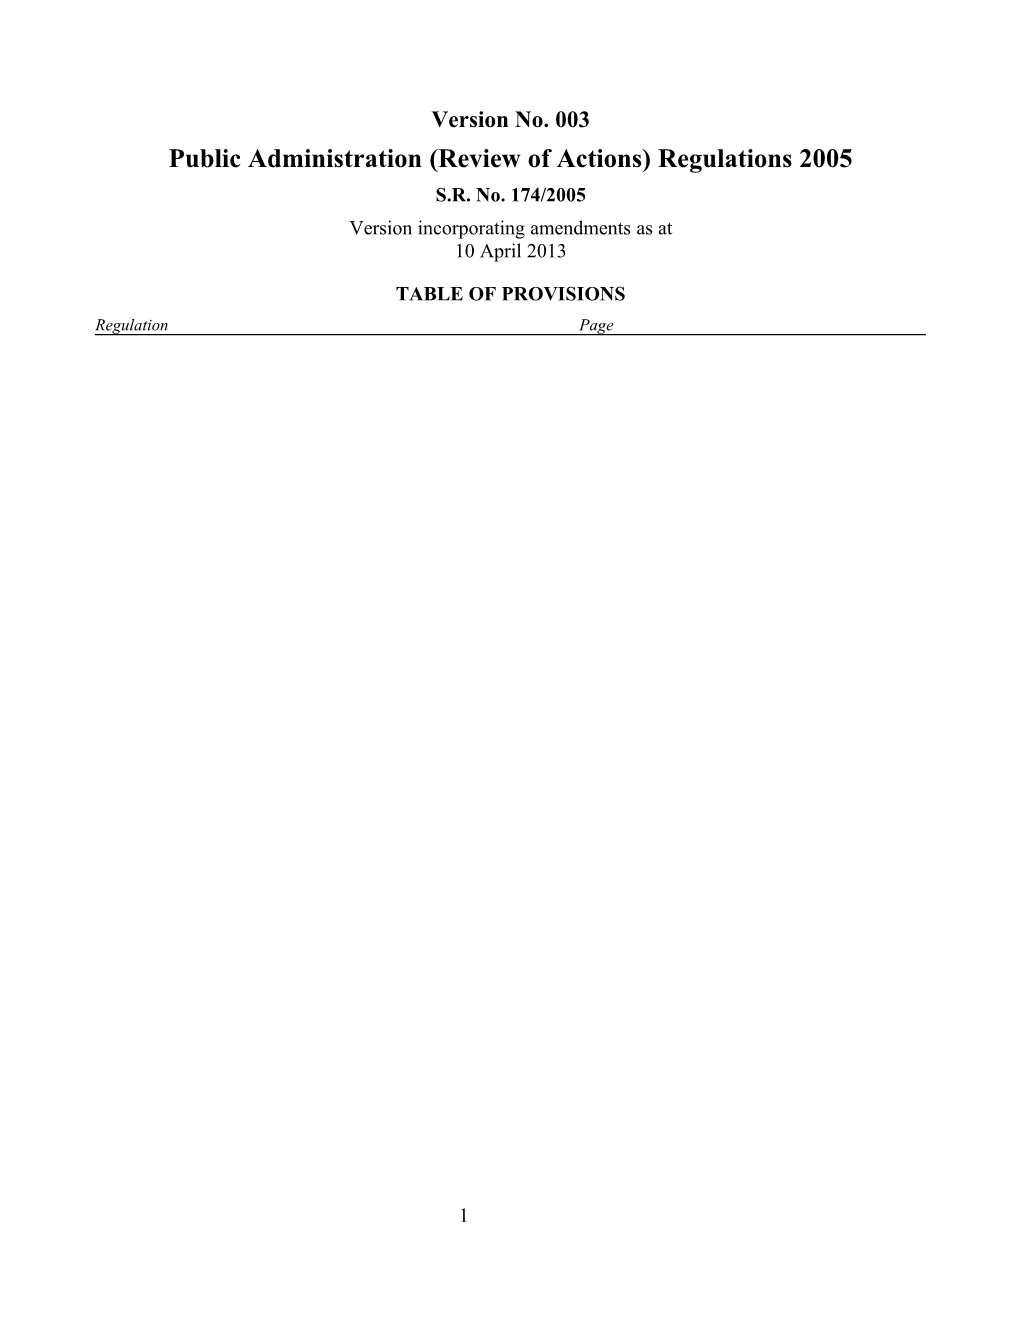 Public Administration (Review of Actions) Regulations 2005